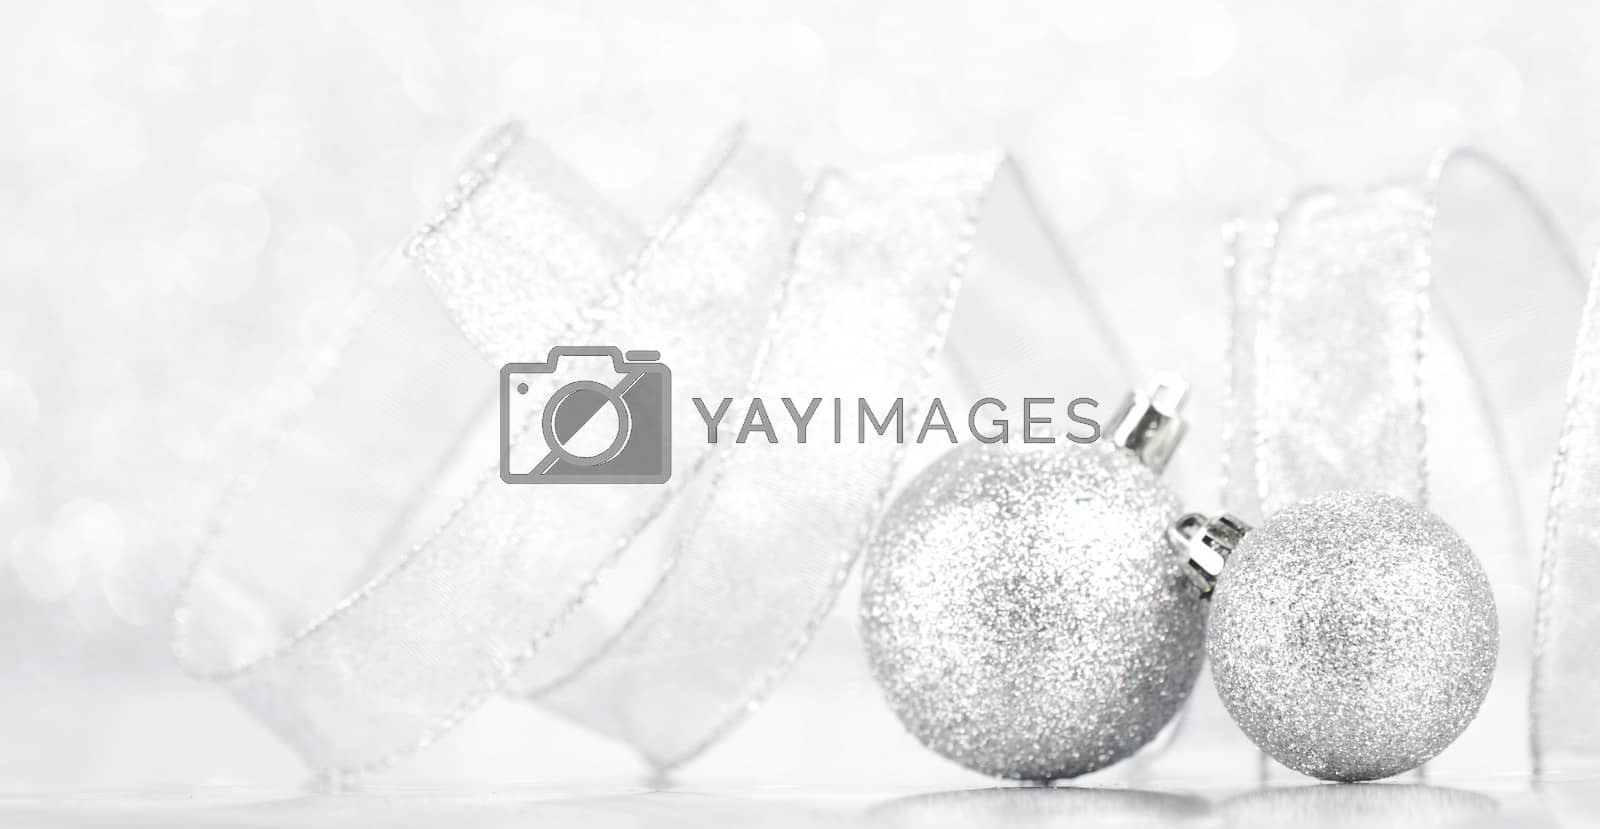 Royalty free image of Christmas decor by Yellowj